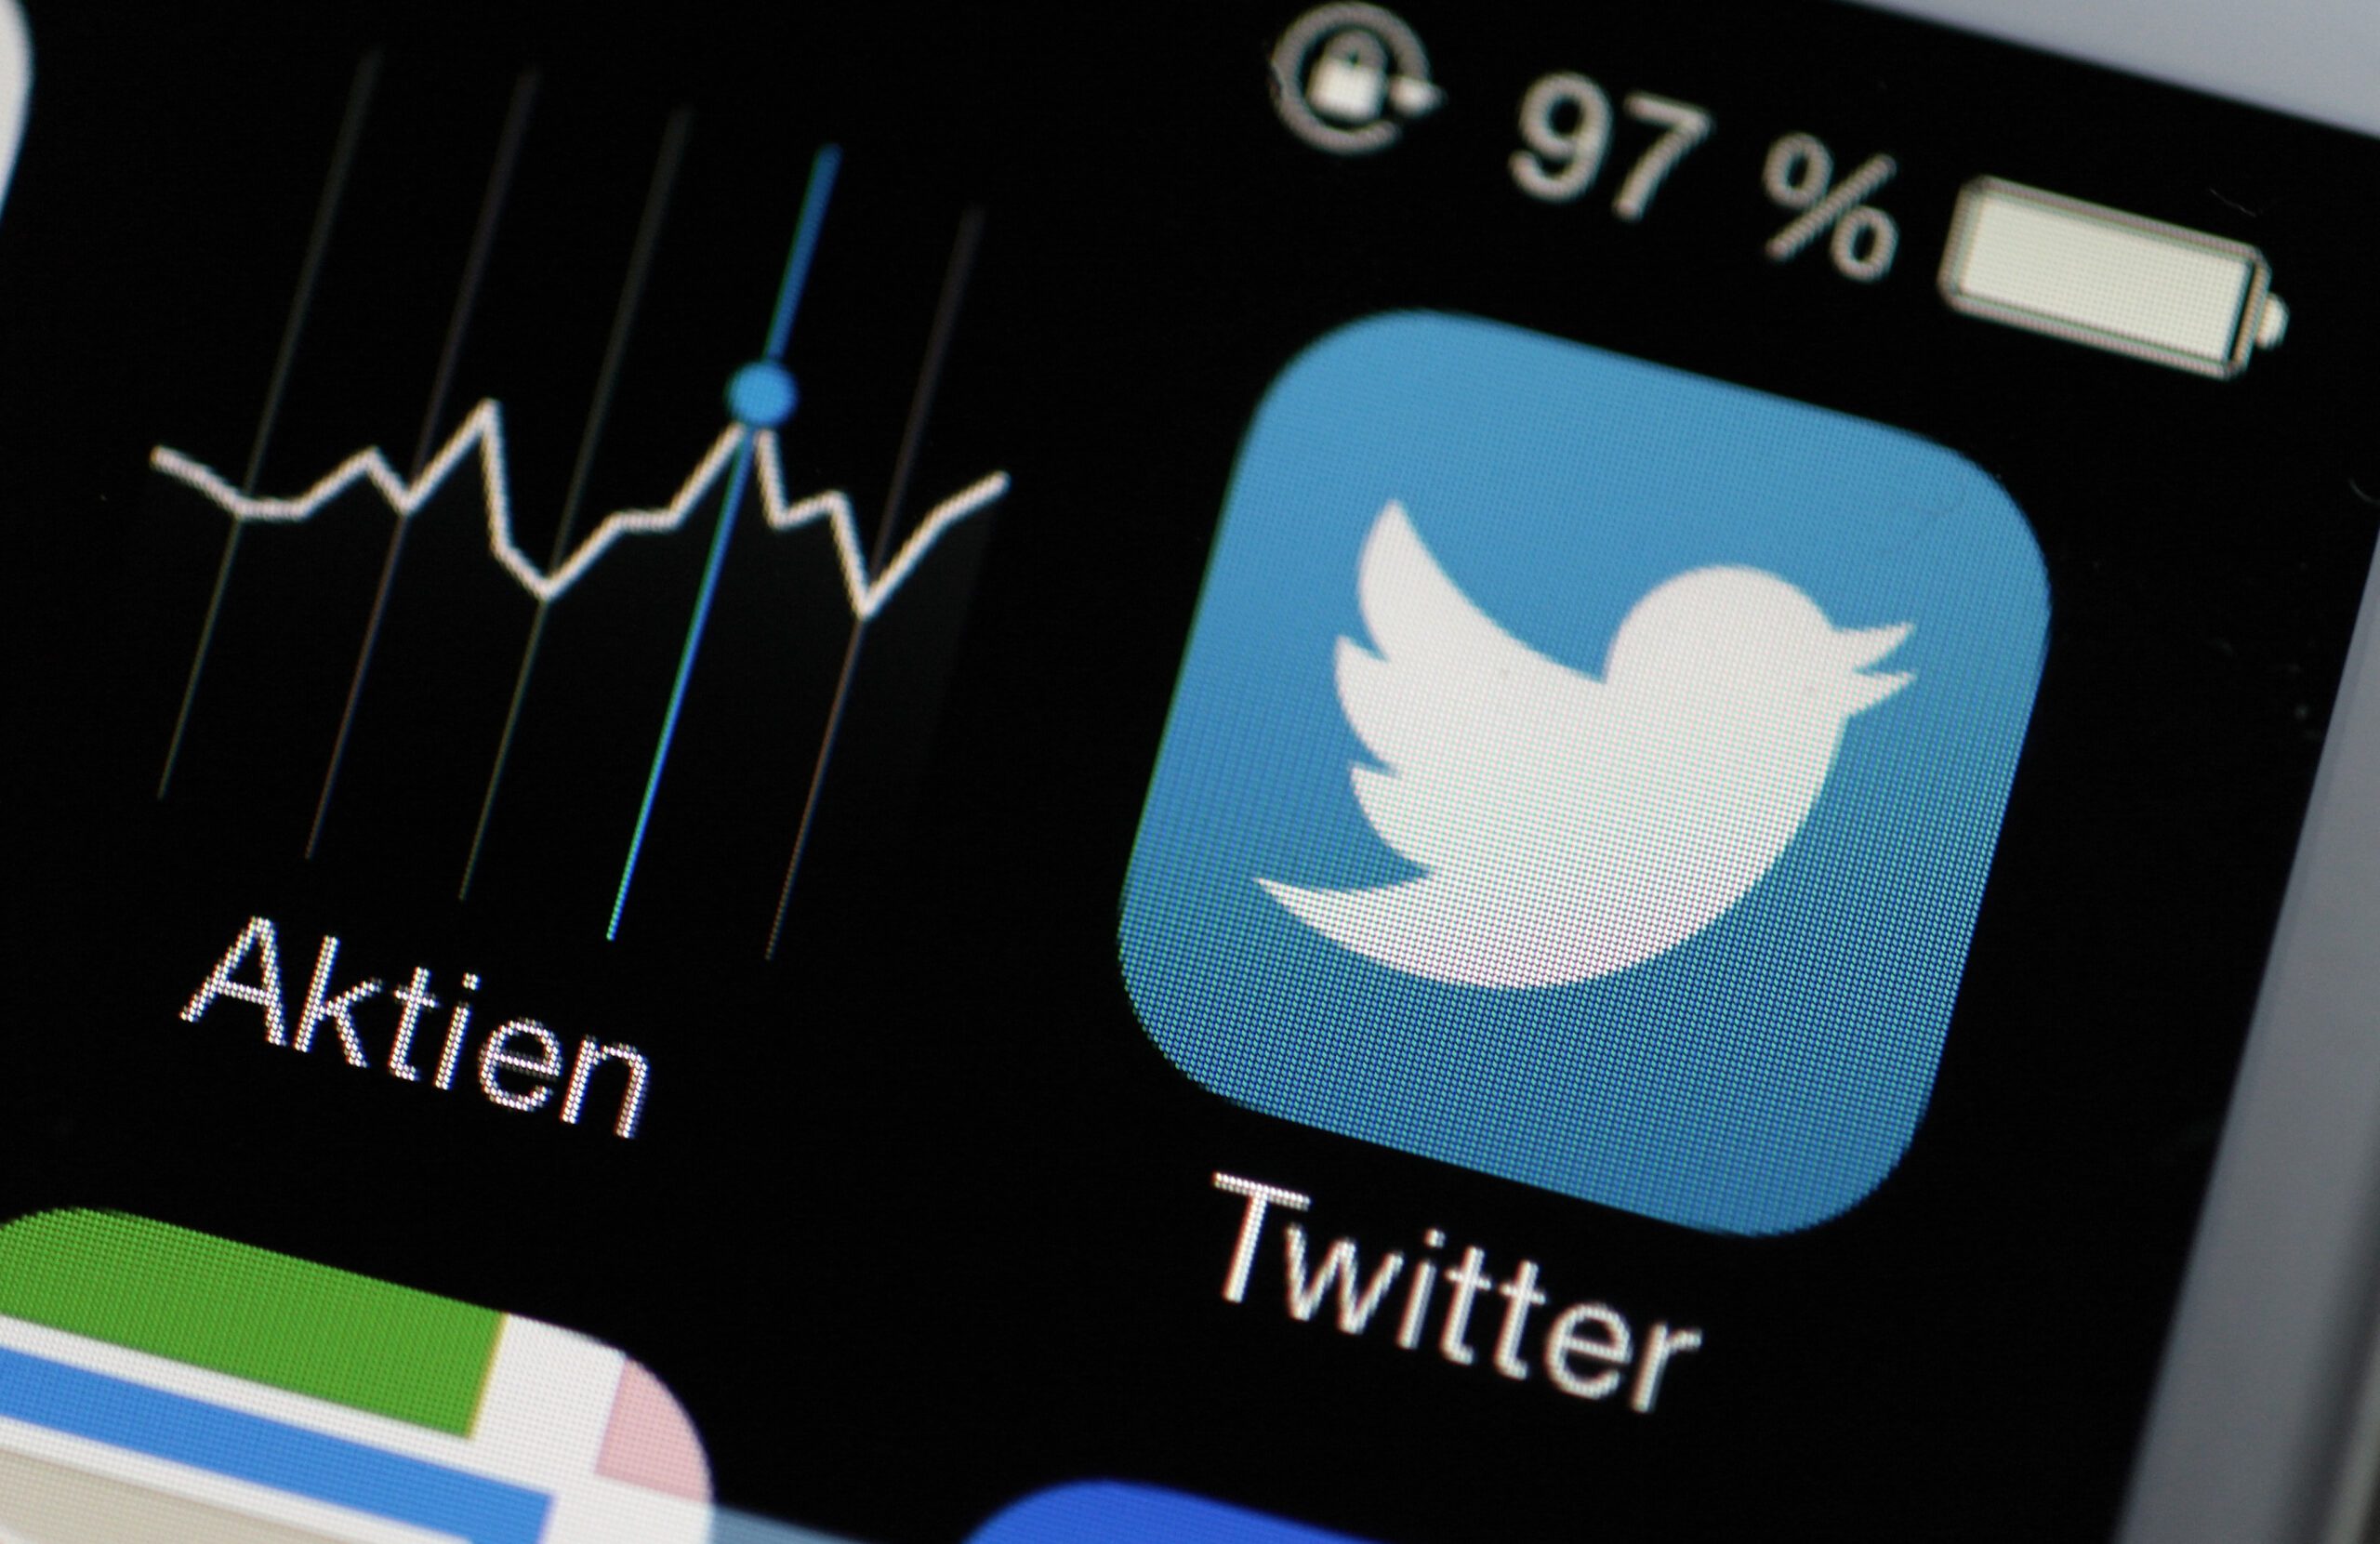 Twitter shares dive after update disappoints